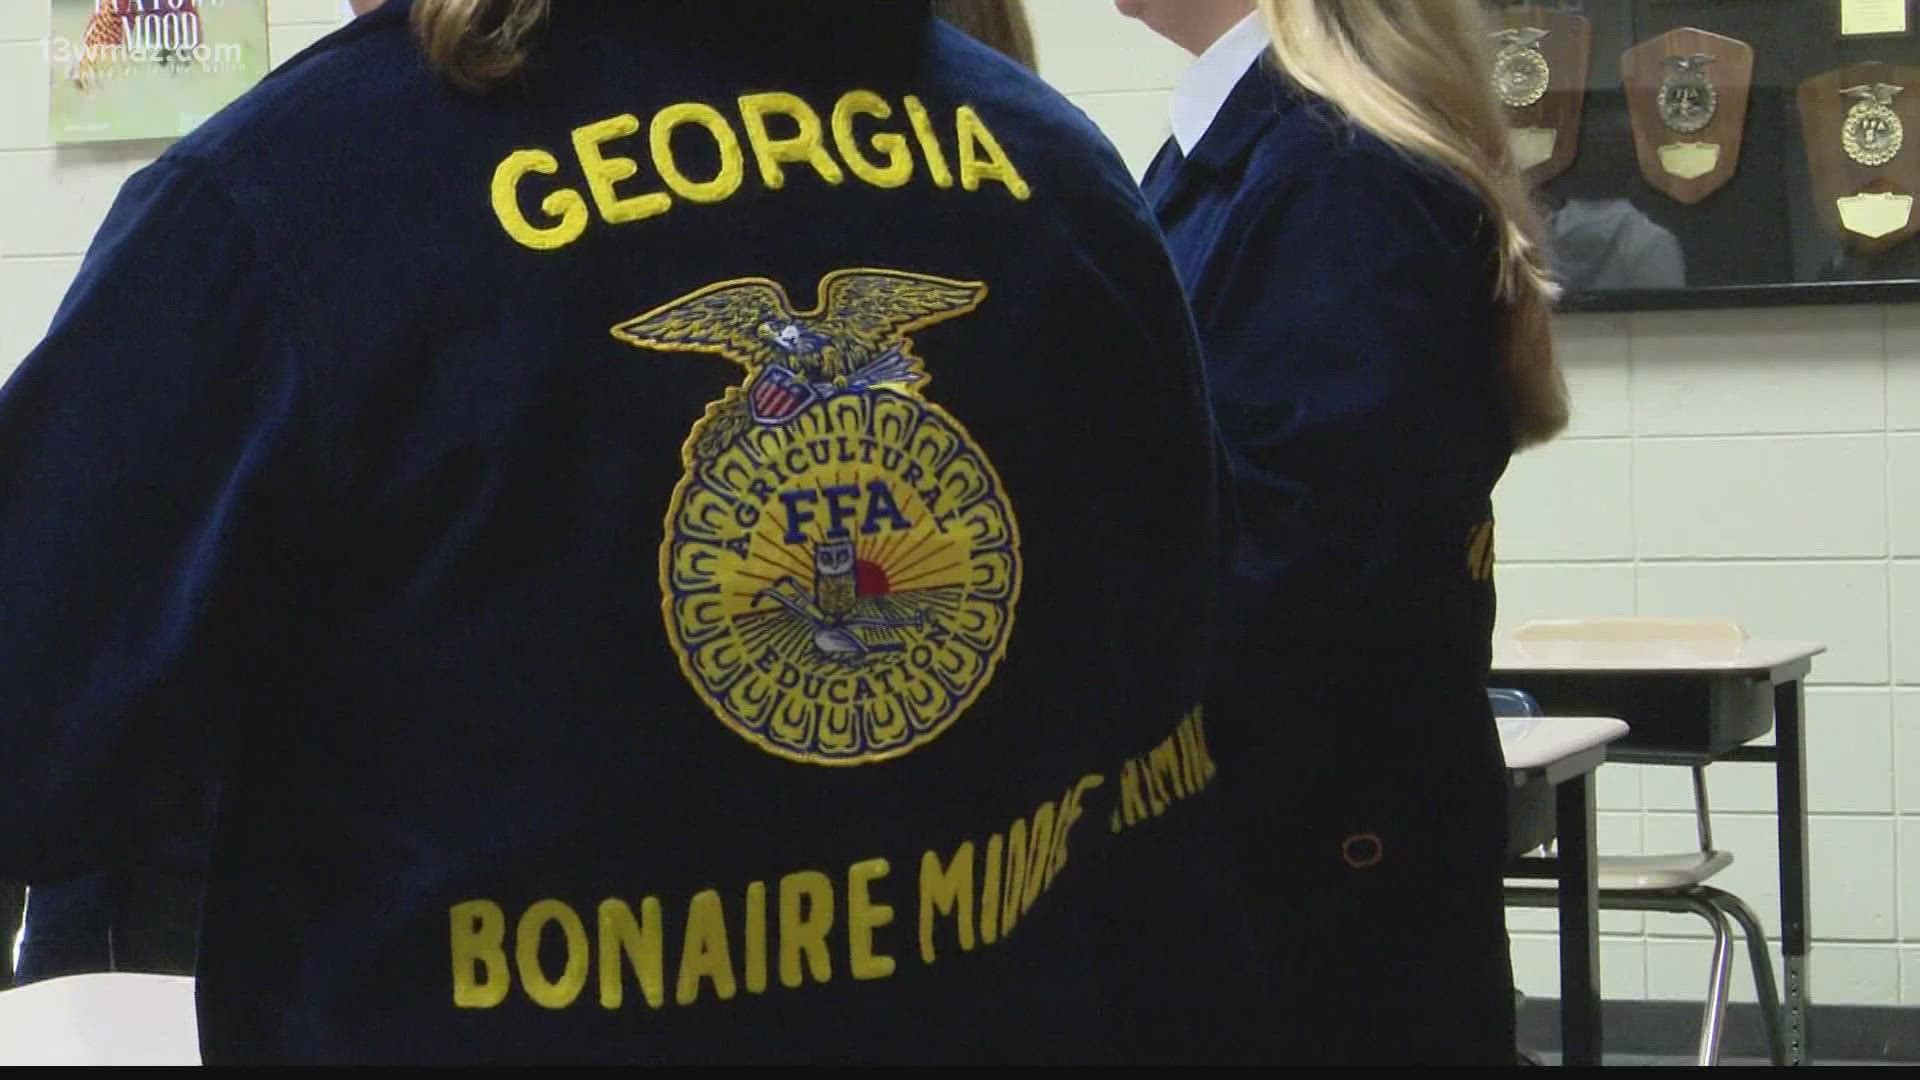 They are 1 of 5 middle schools competing nationally for the highest honor awarded to a middle school FFA chapter by the National FFA Organization.